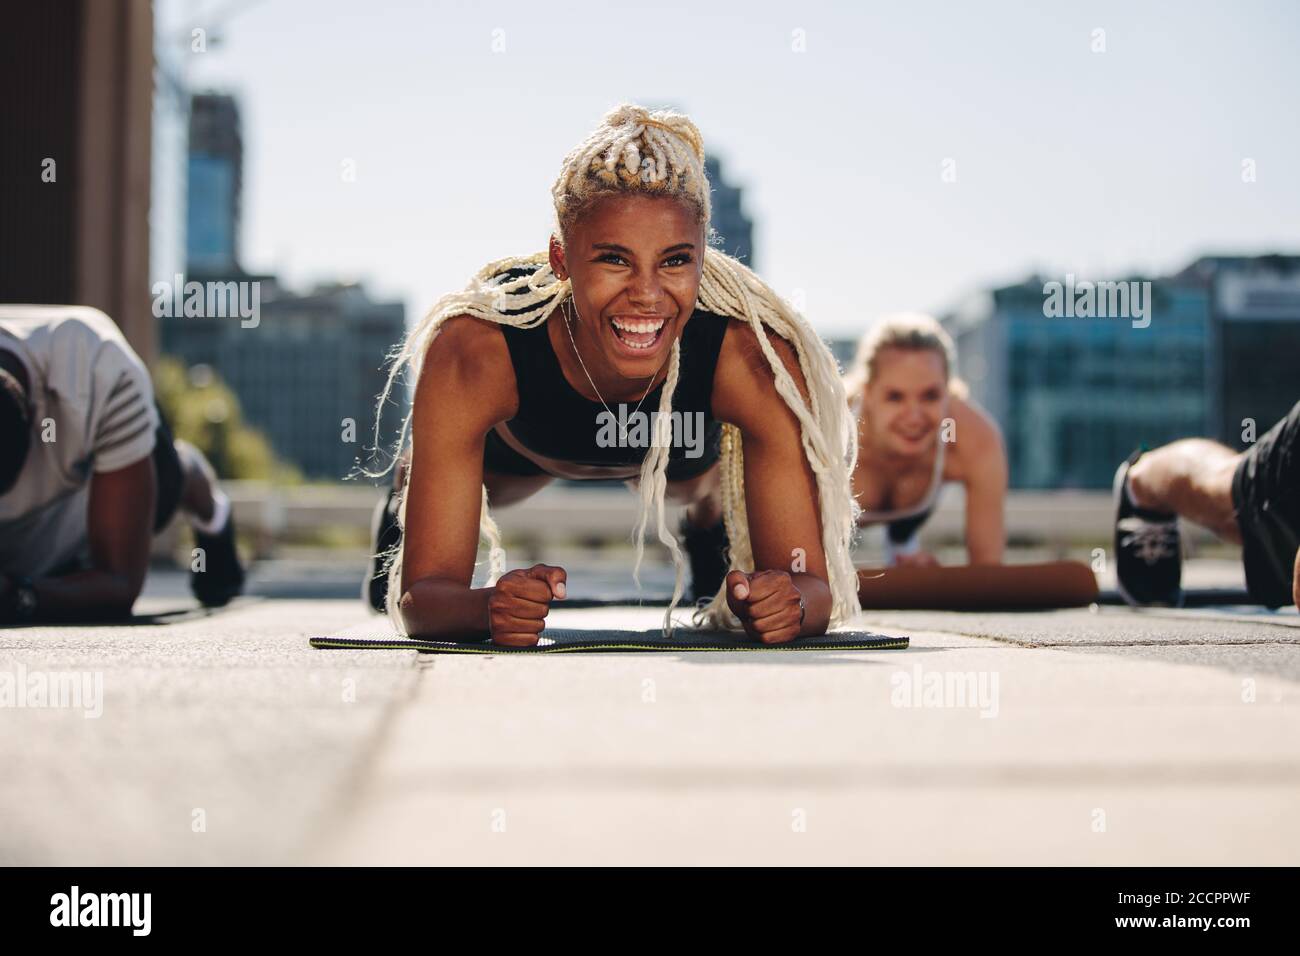 Group of young adults working out together outside in the city. Men and women holding a plank position and smiling. Stock Photo